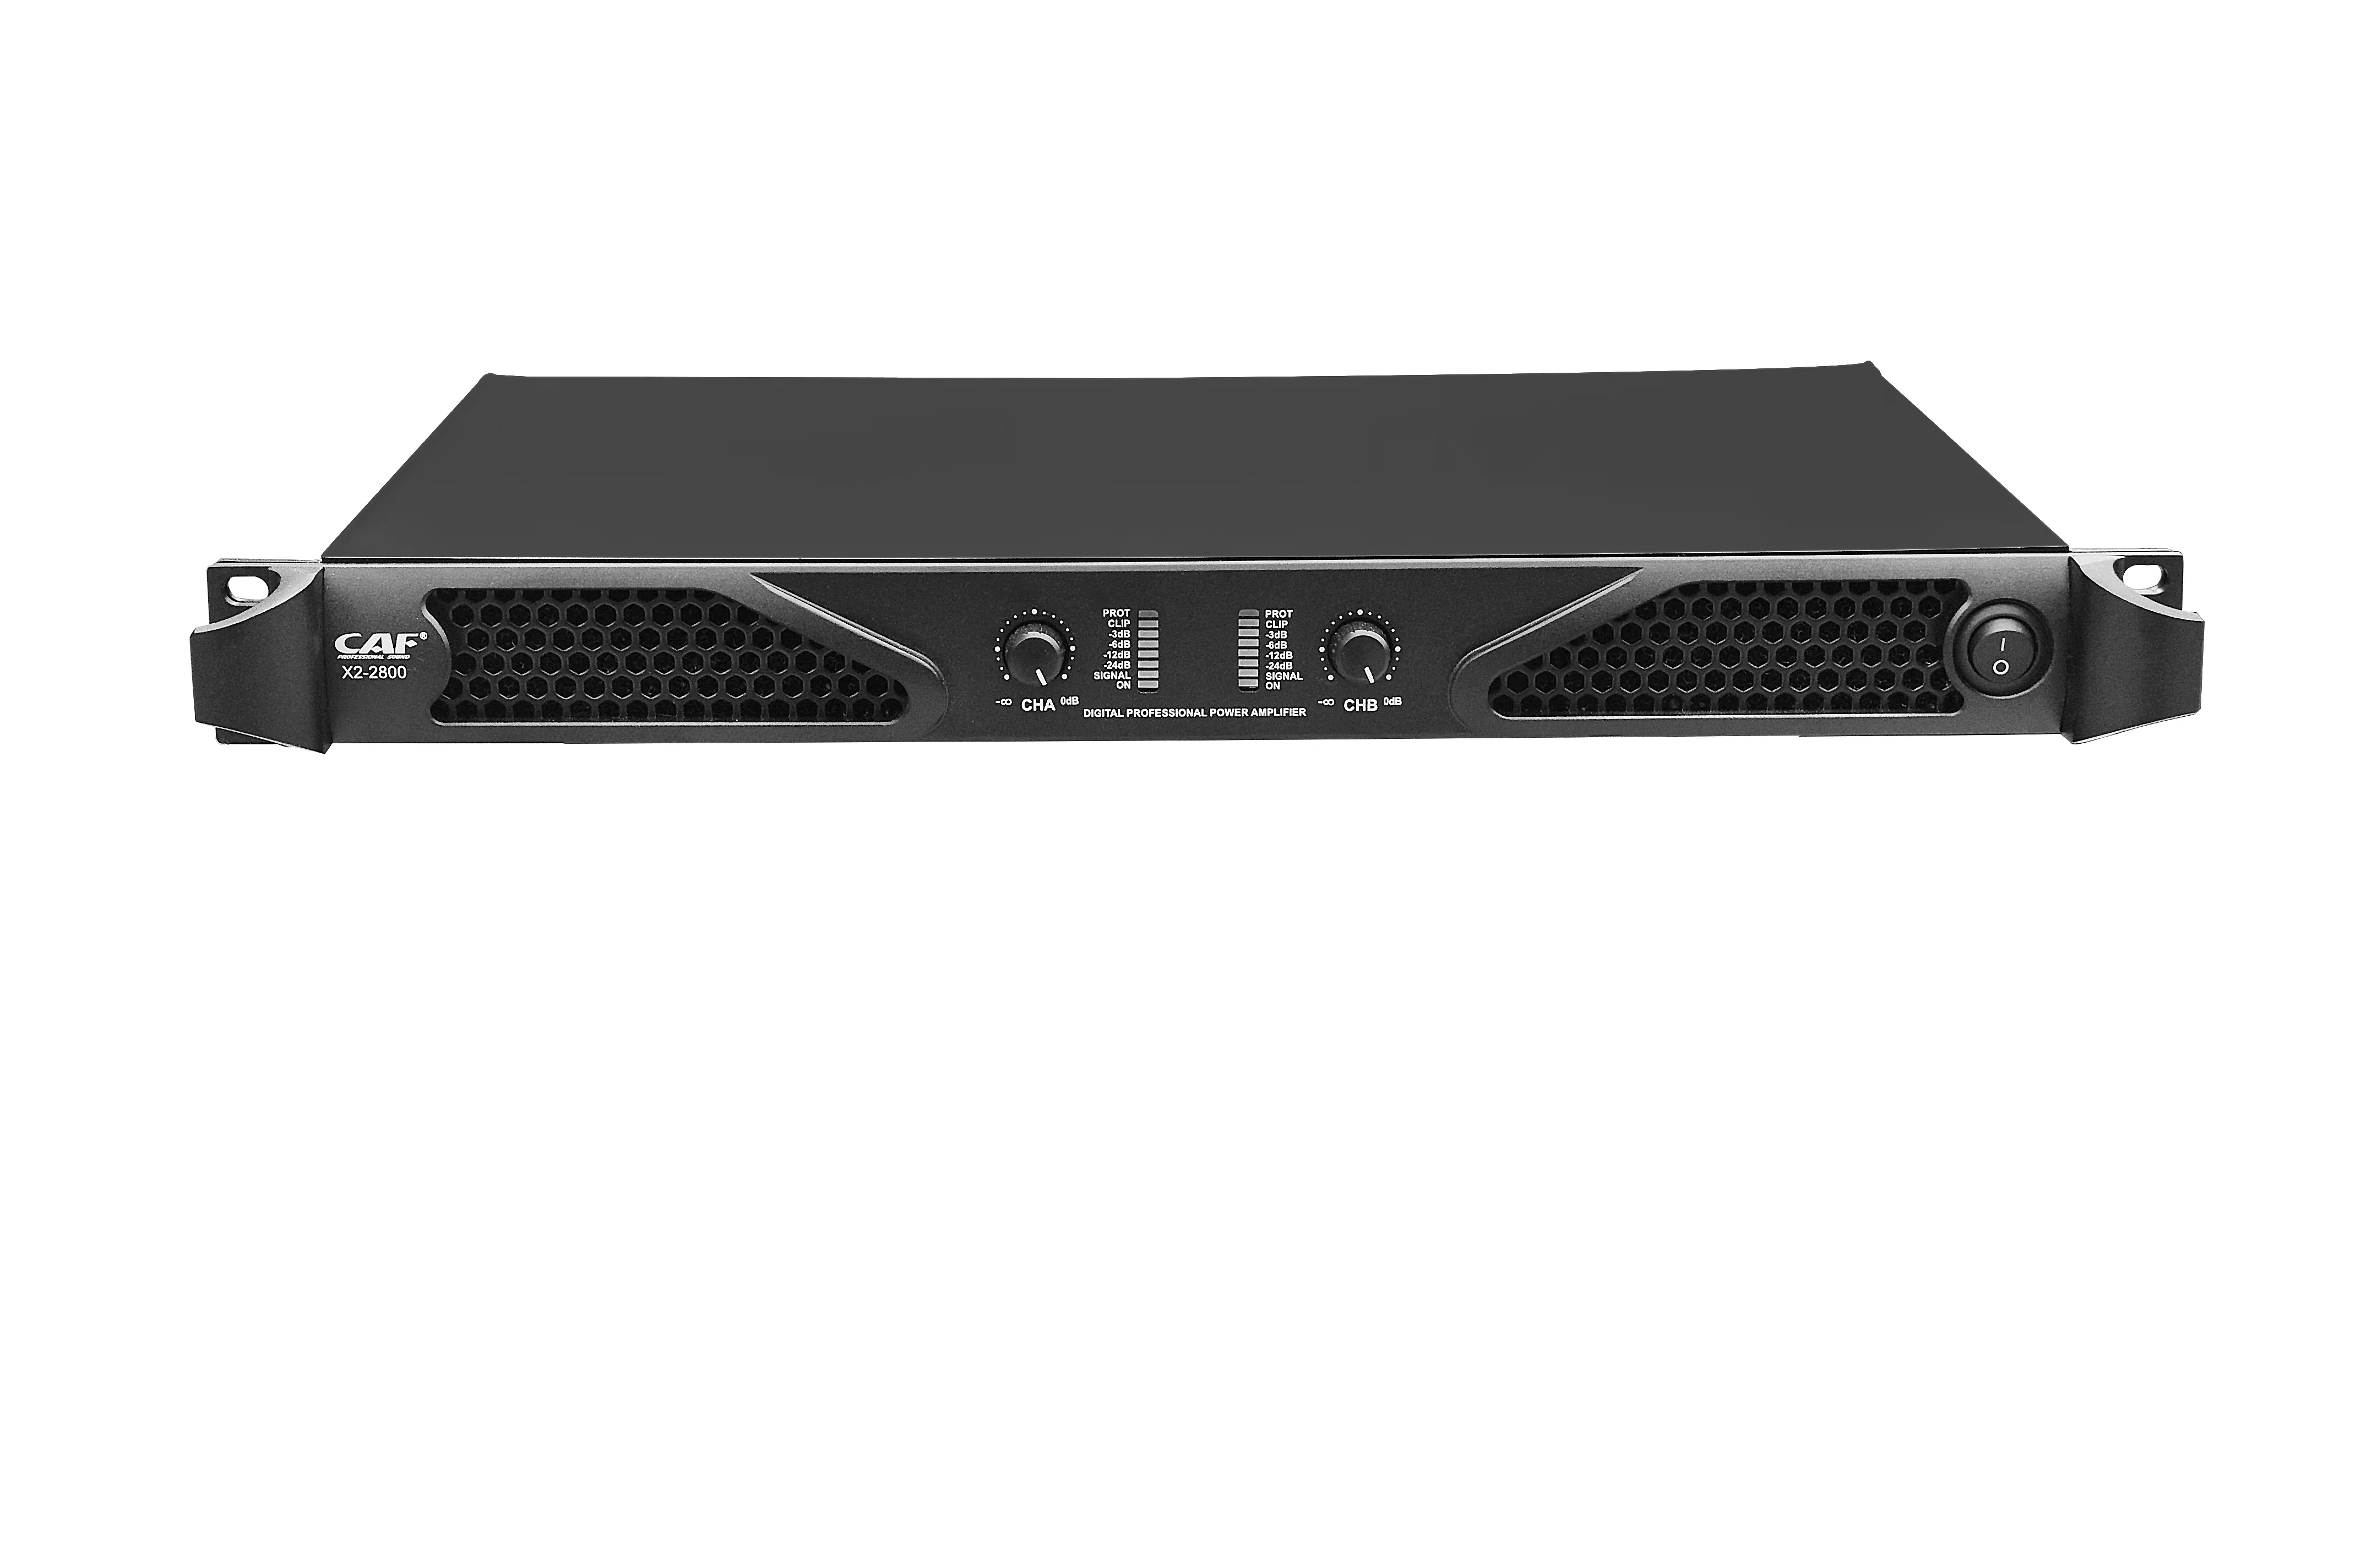 X2-2800 2 Channel power amplifier manufacturer in China